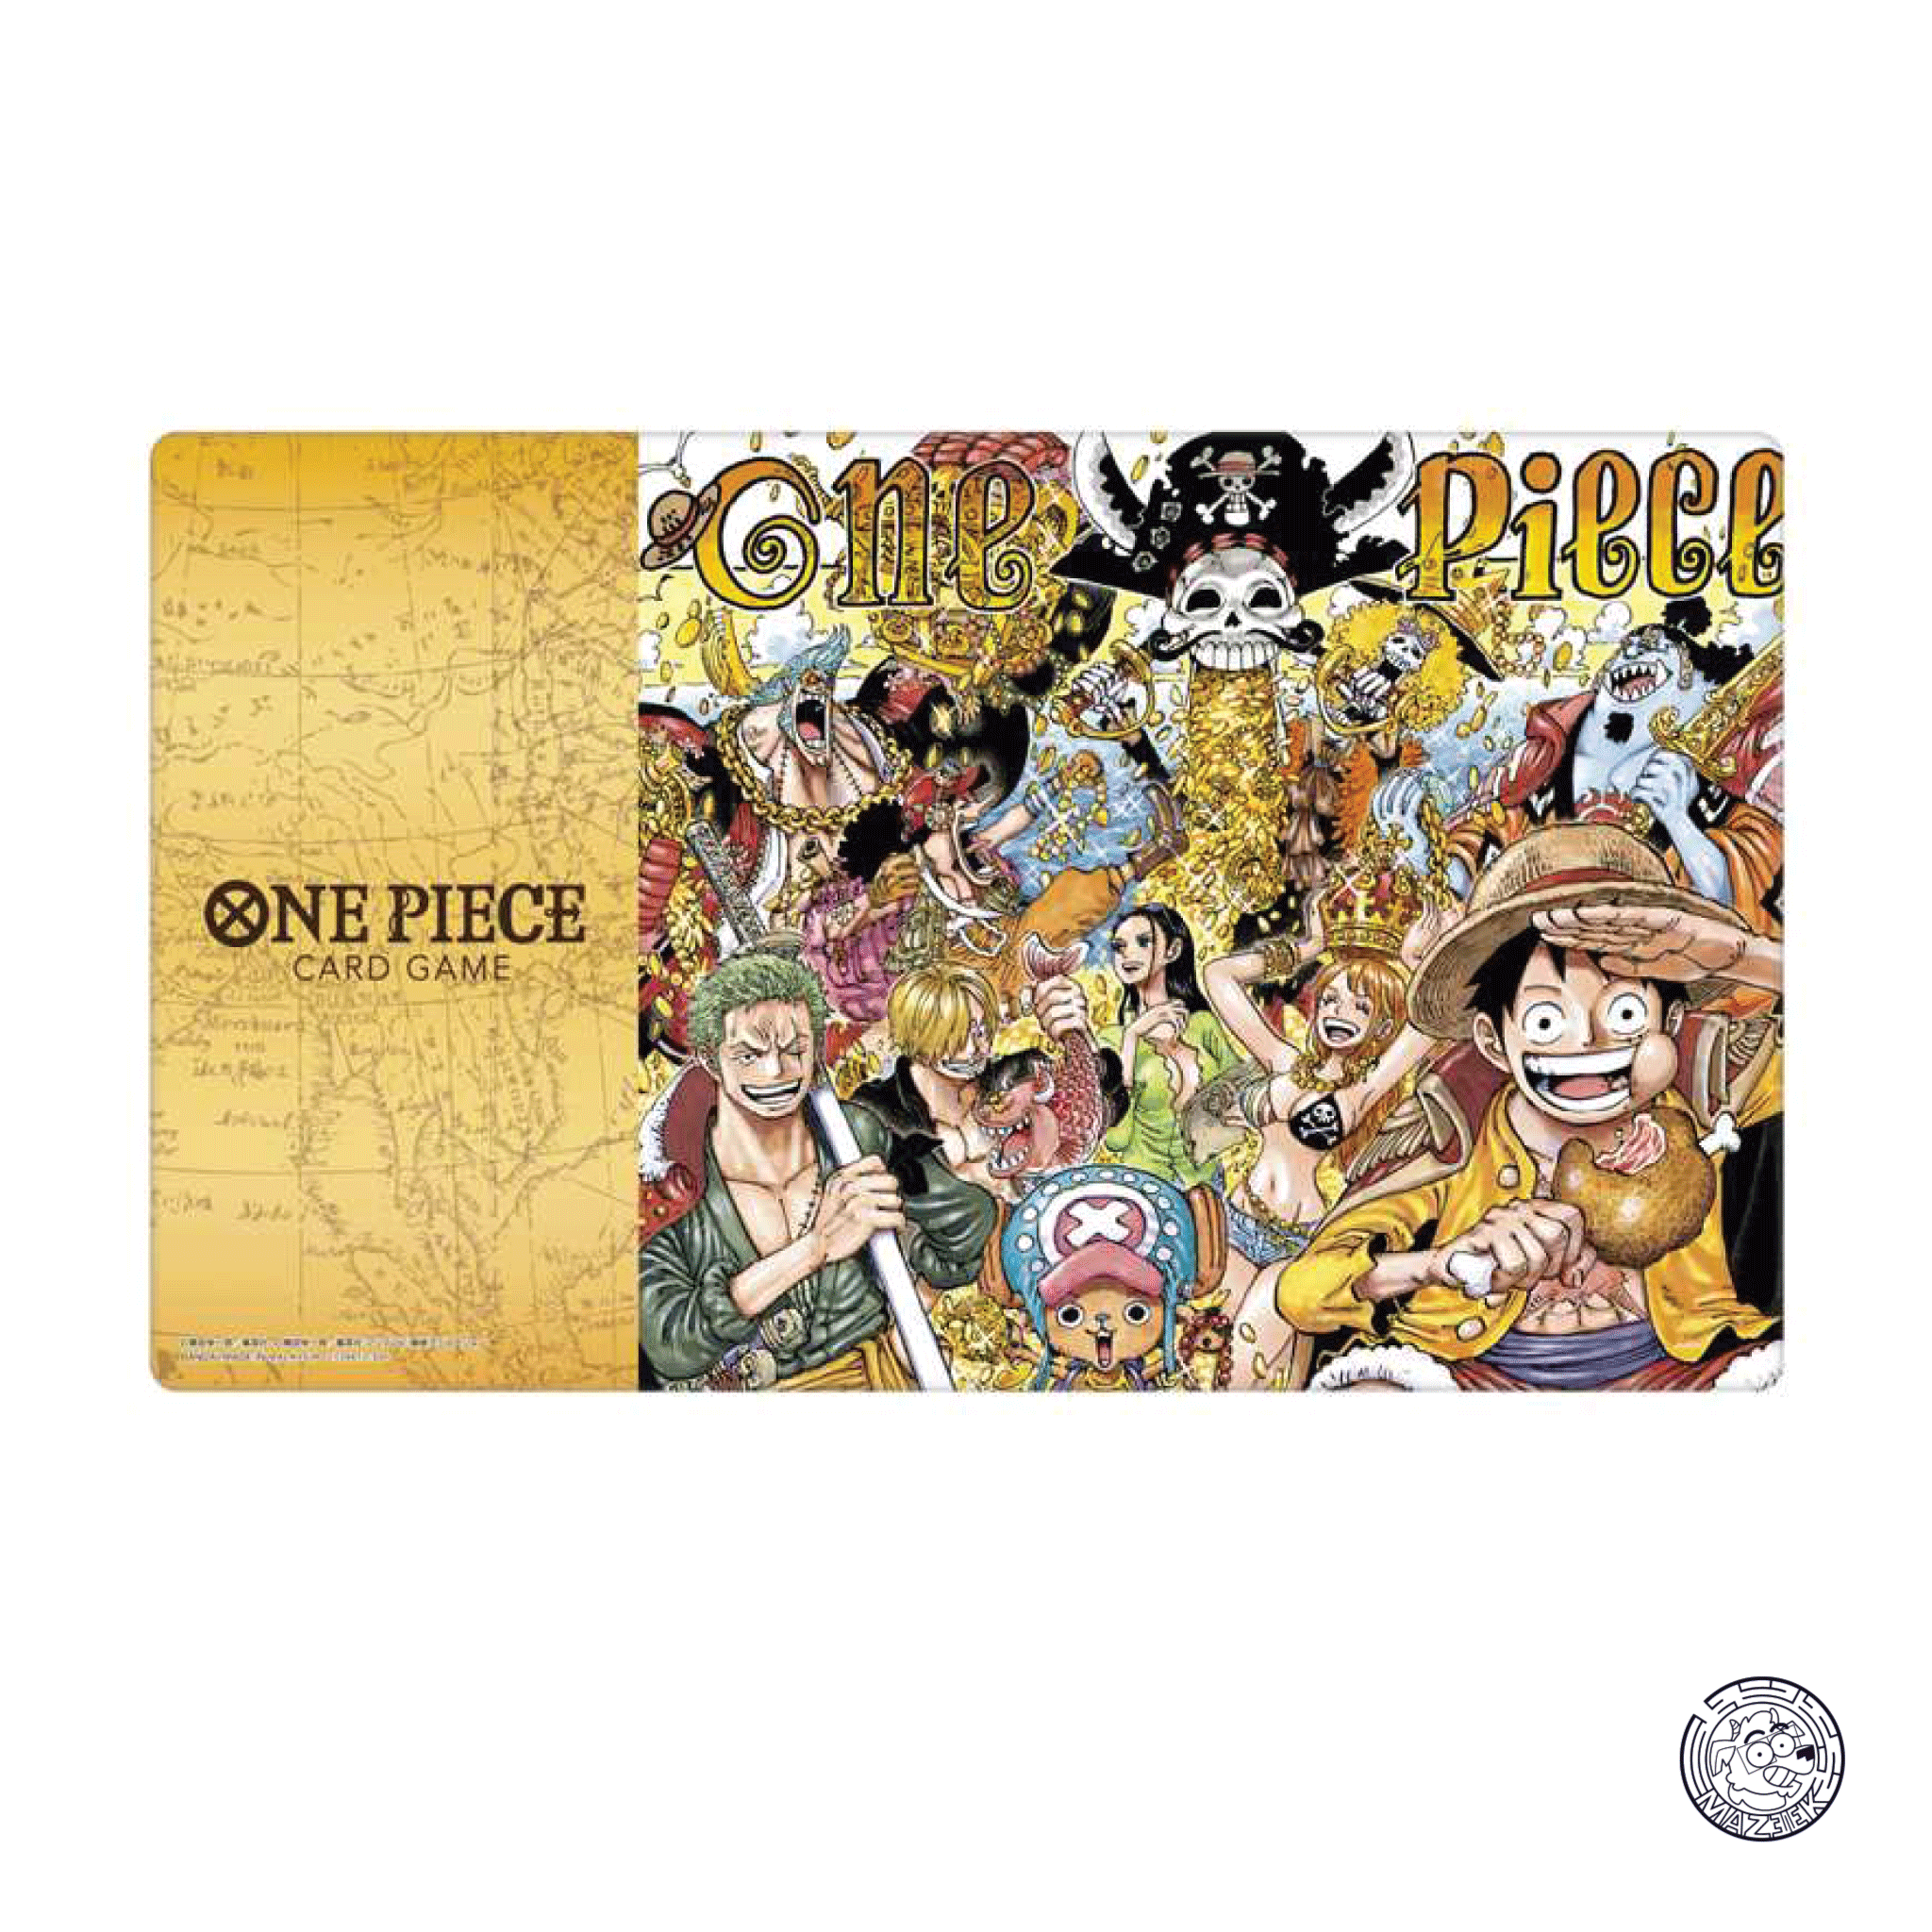 One Piece! Card Game Official Playmat Limited Edition Vol.1